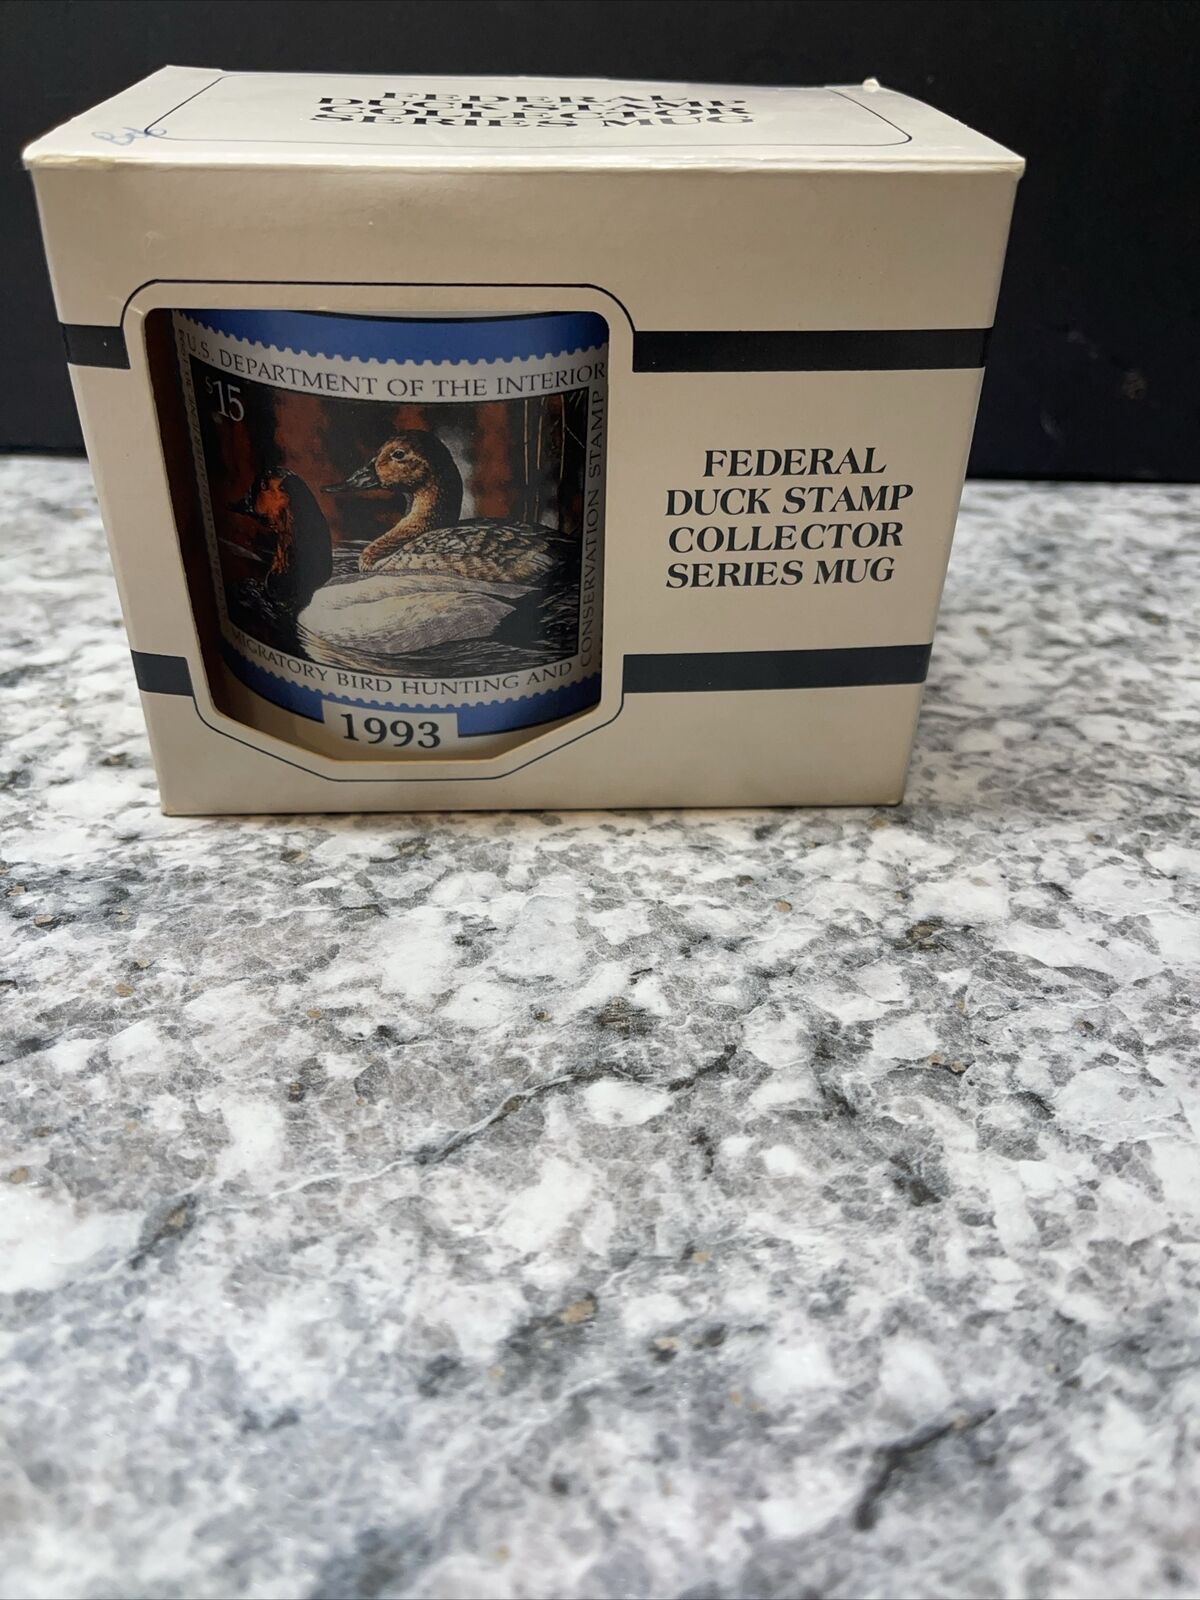 VTG 1993 Federal Duck Stamp Collector Series Mug. Canvasback Duck